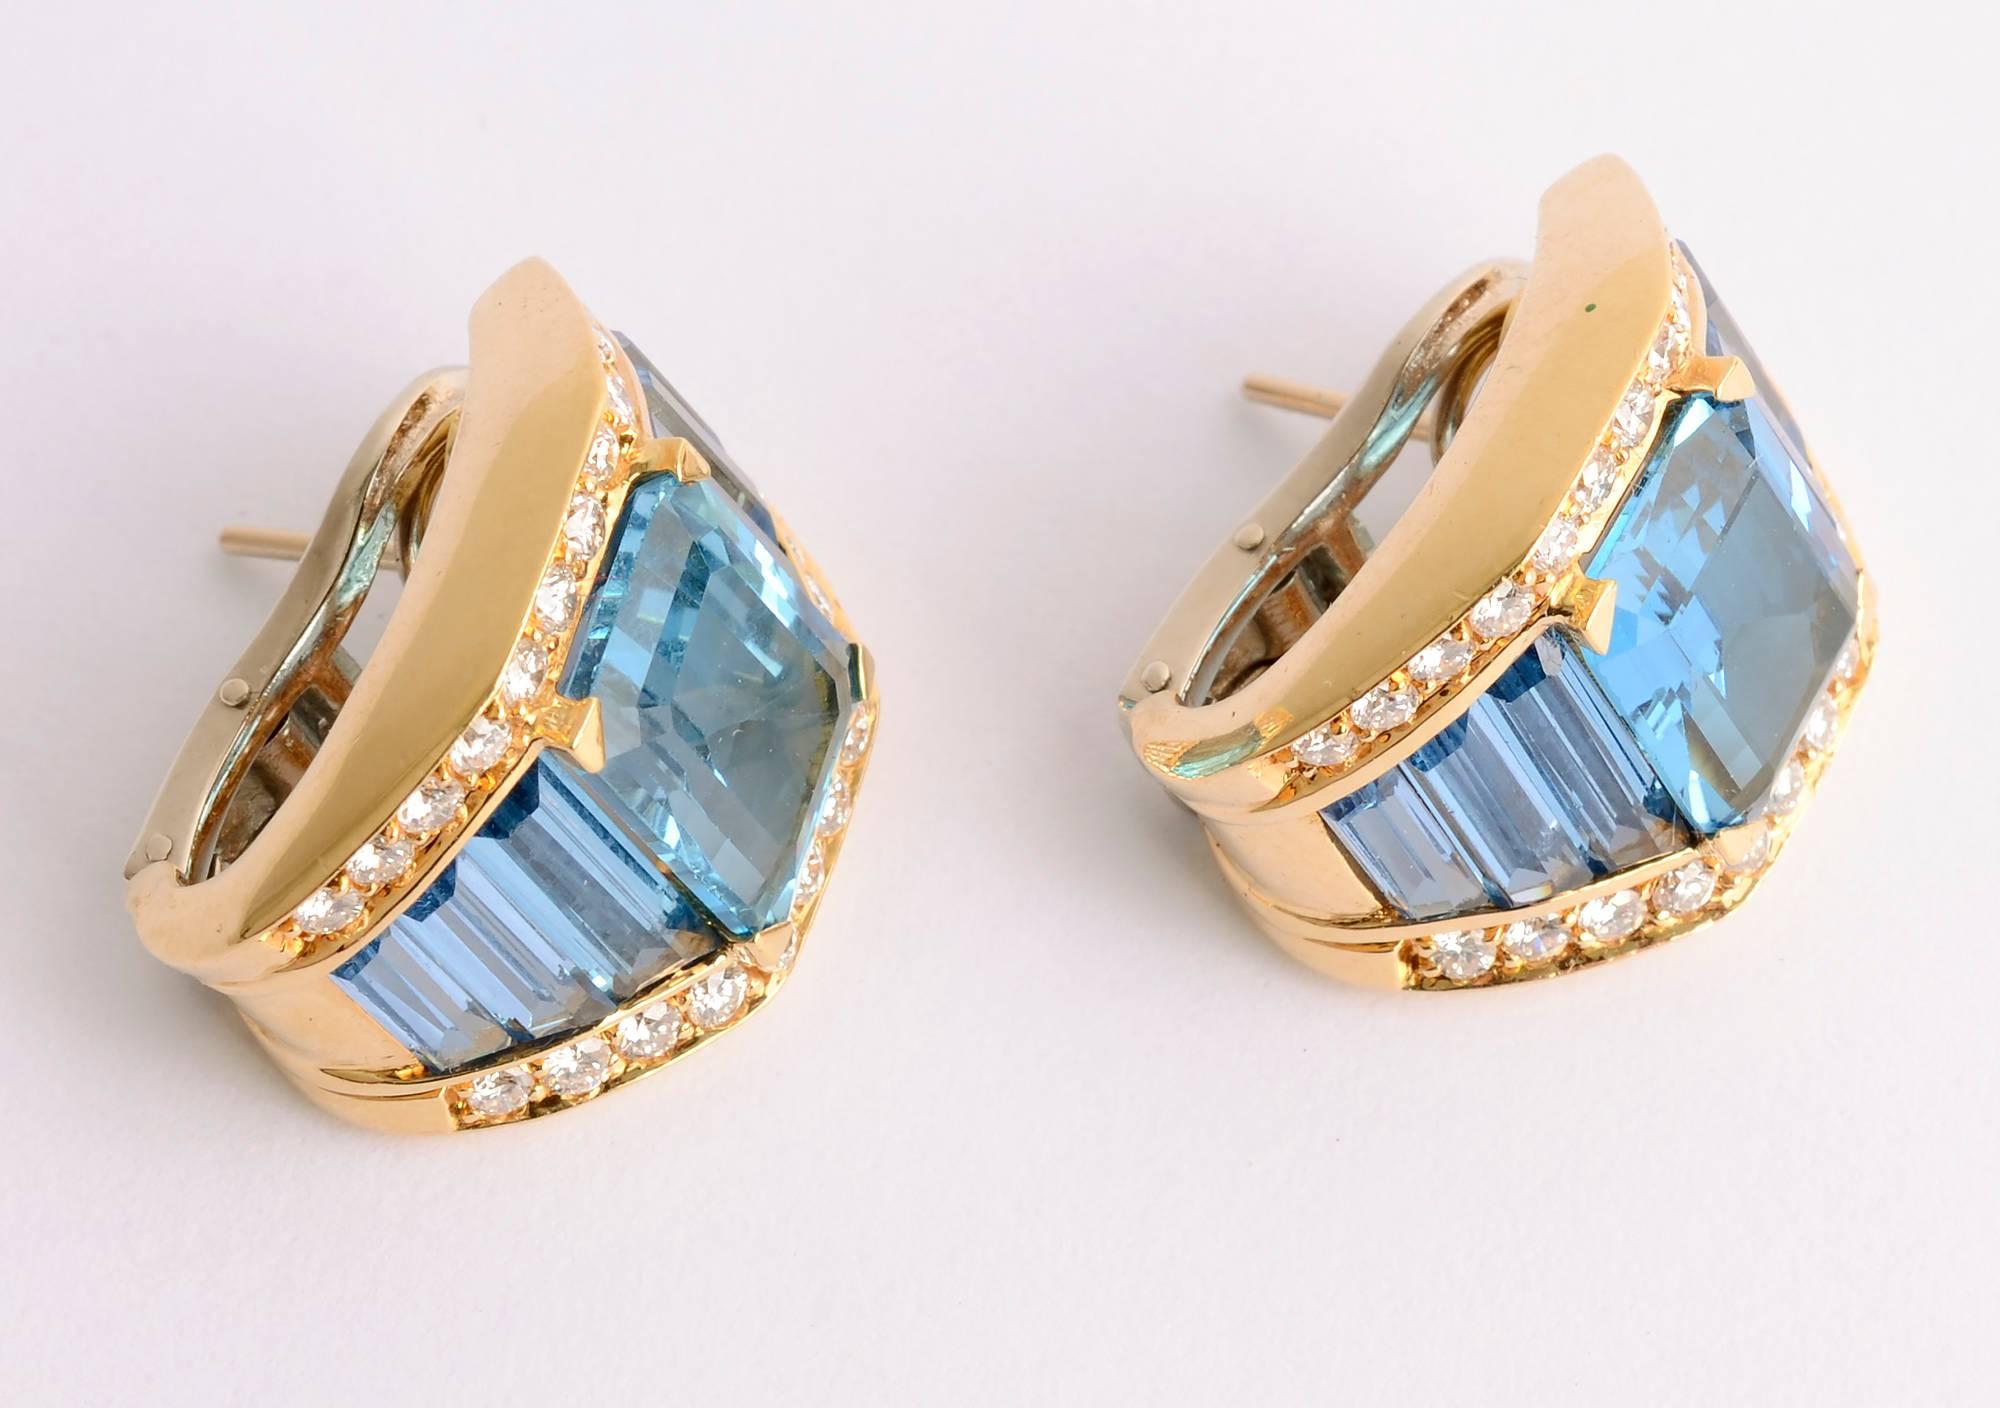 Beautifully colored blue topaz earrings with diamonds by H. Stern. The central blue topaz is approximately 4 carats with three graduated smaller ones top and bottom. Backs are clips and posts.